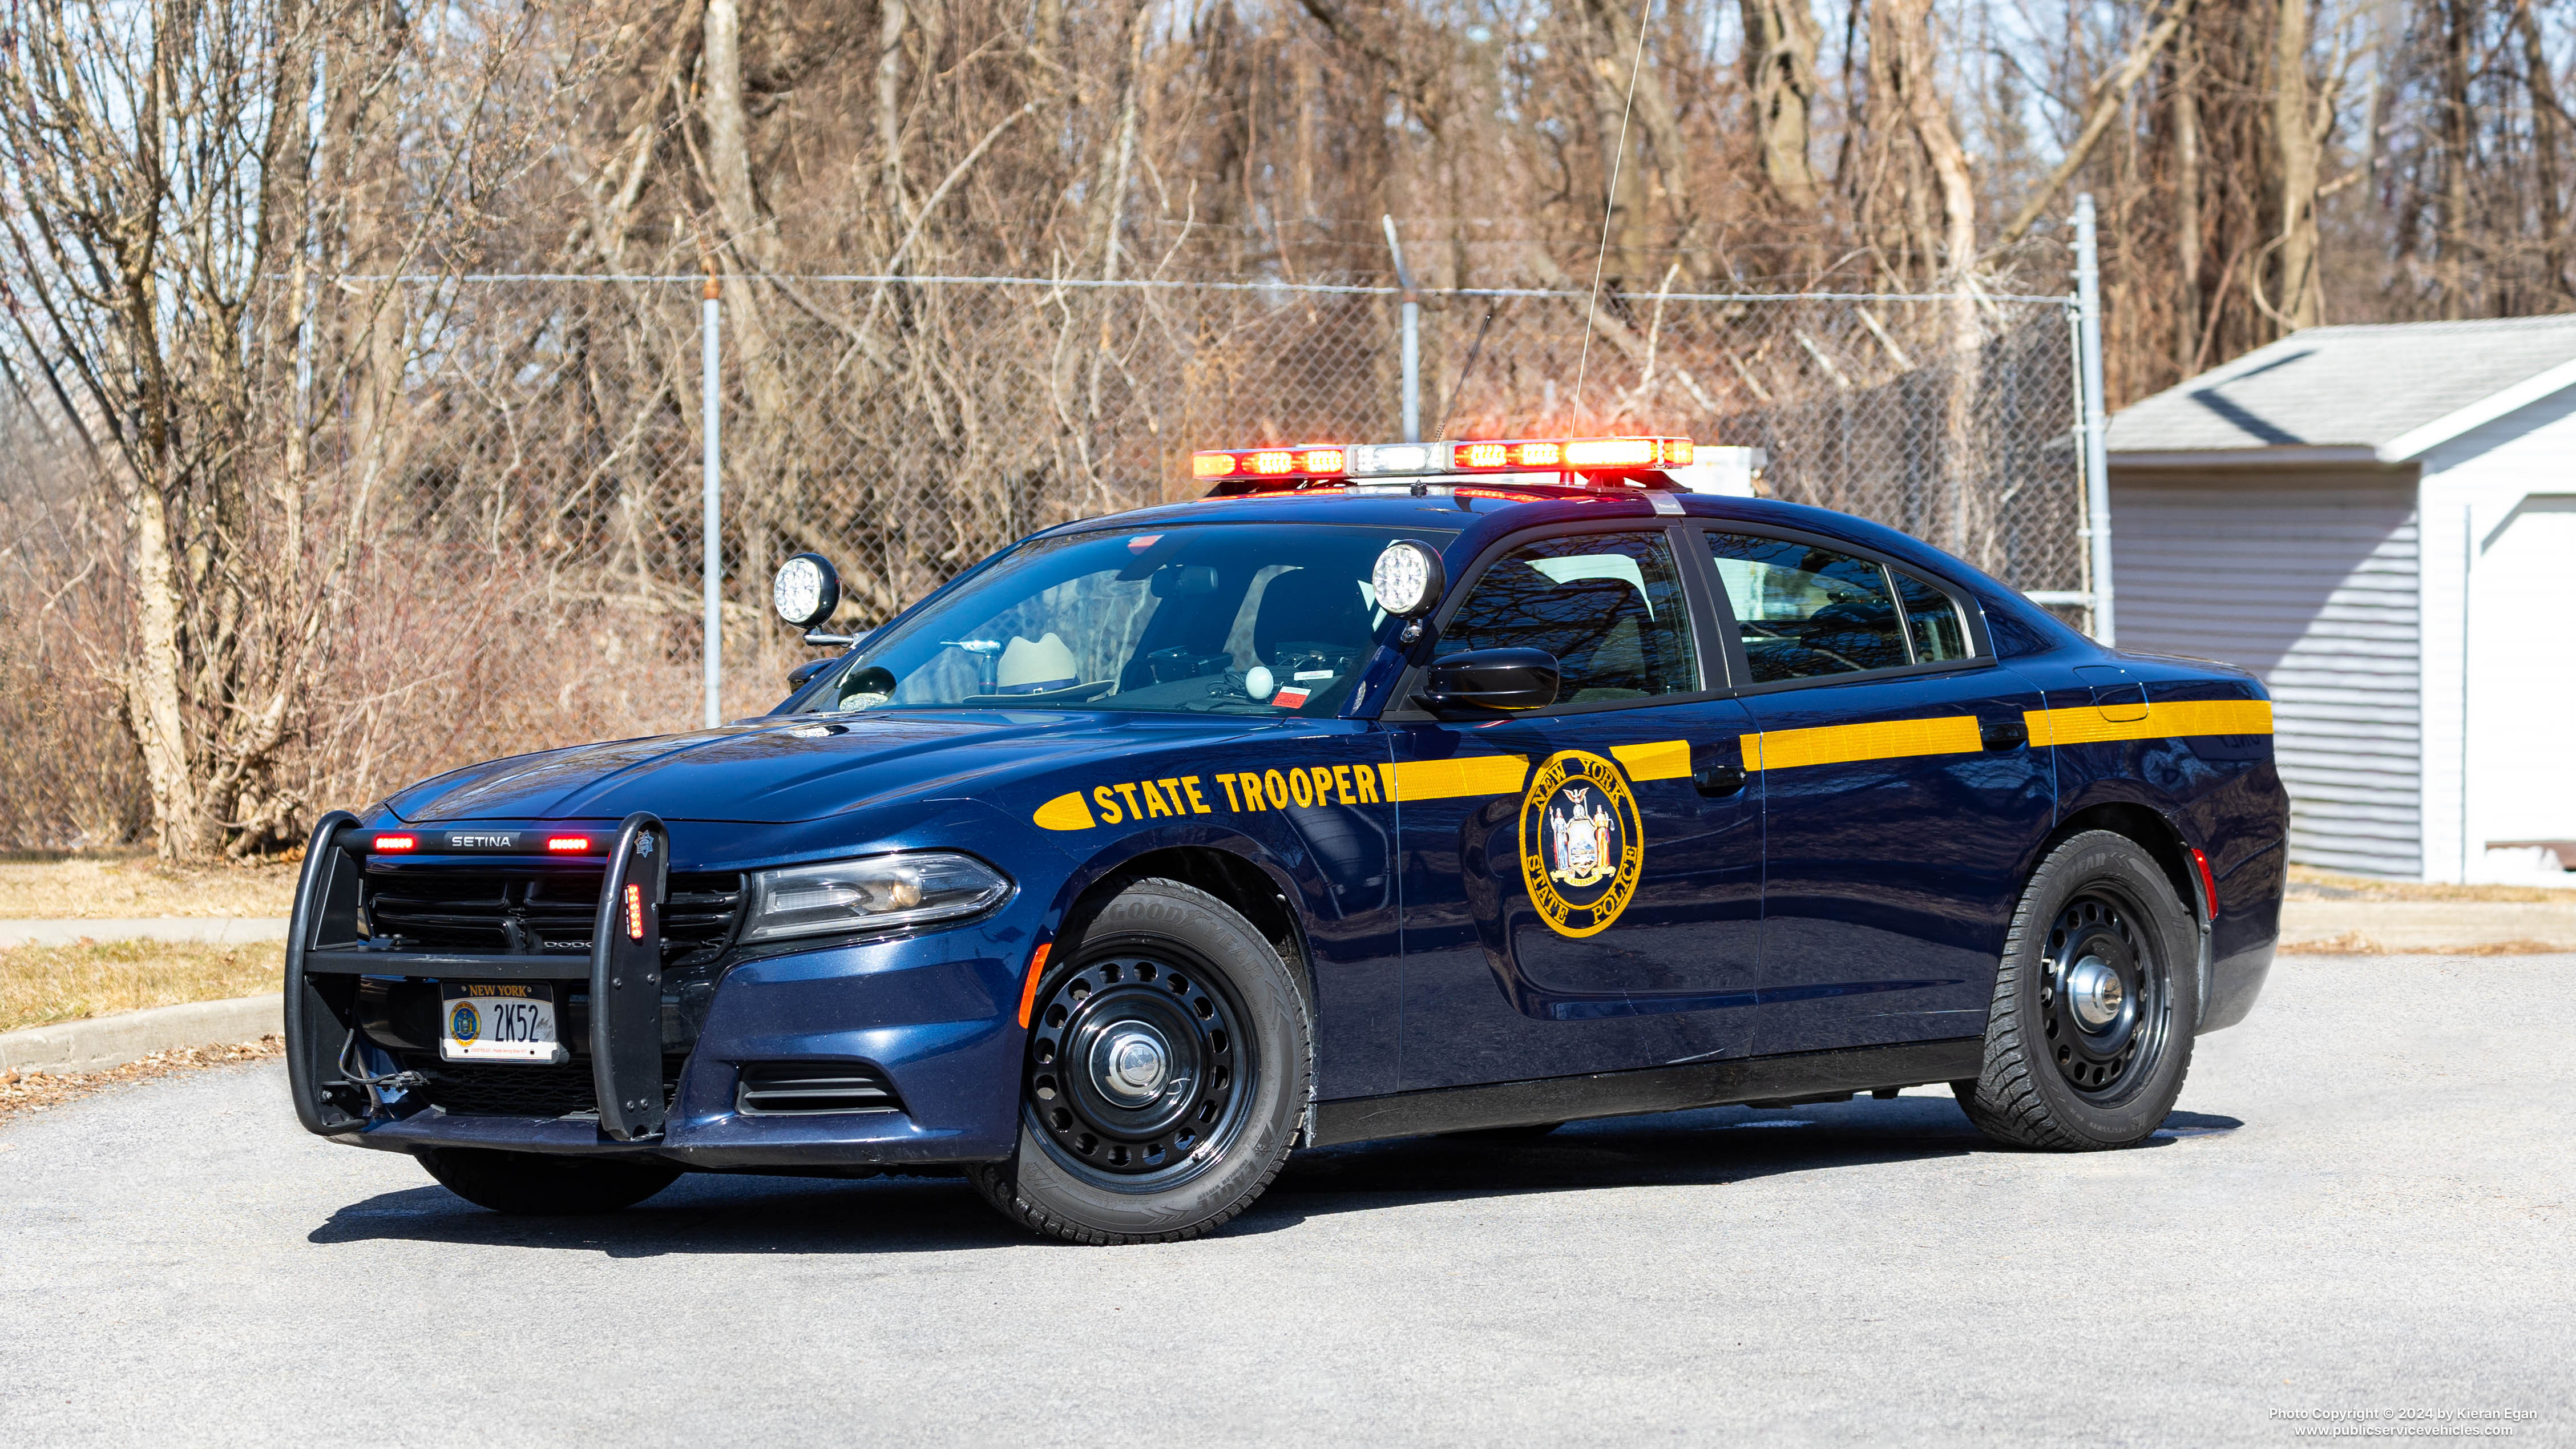 A photo  of New York State Police
            Cruiser 2K52, a 2020 Dodge Charger             taken by Kieran Egan